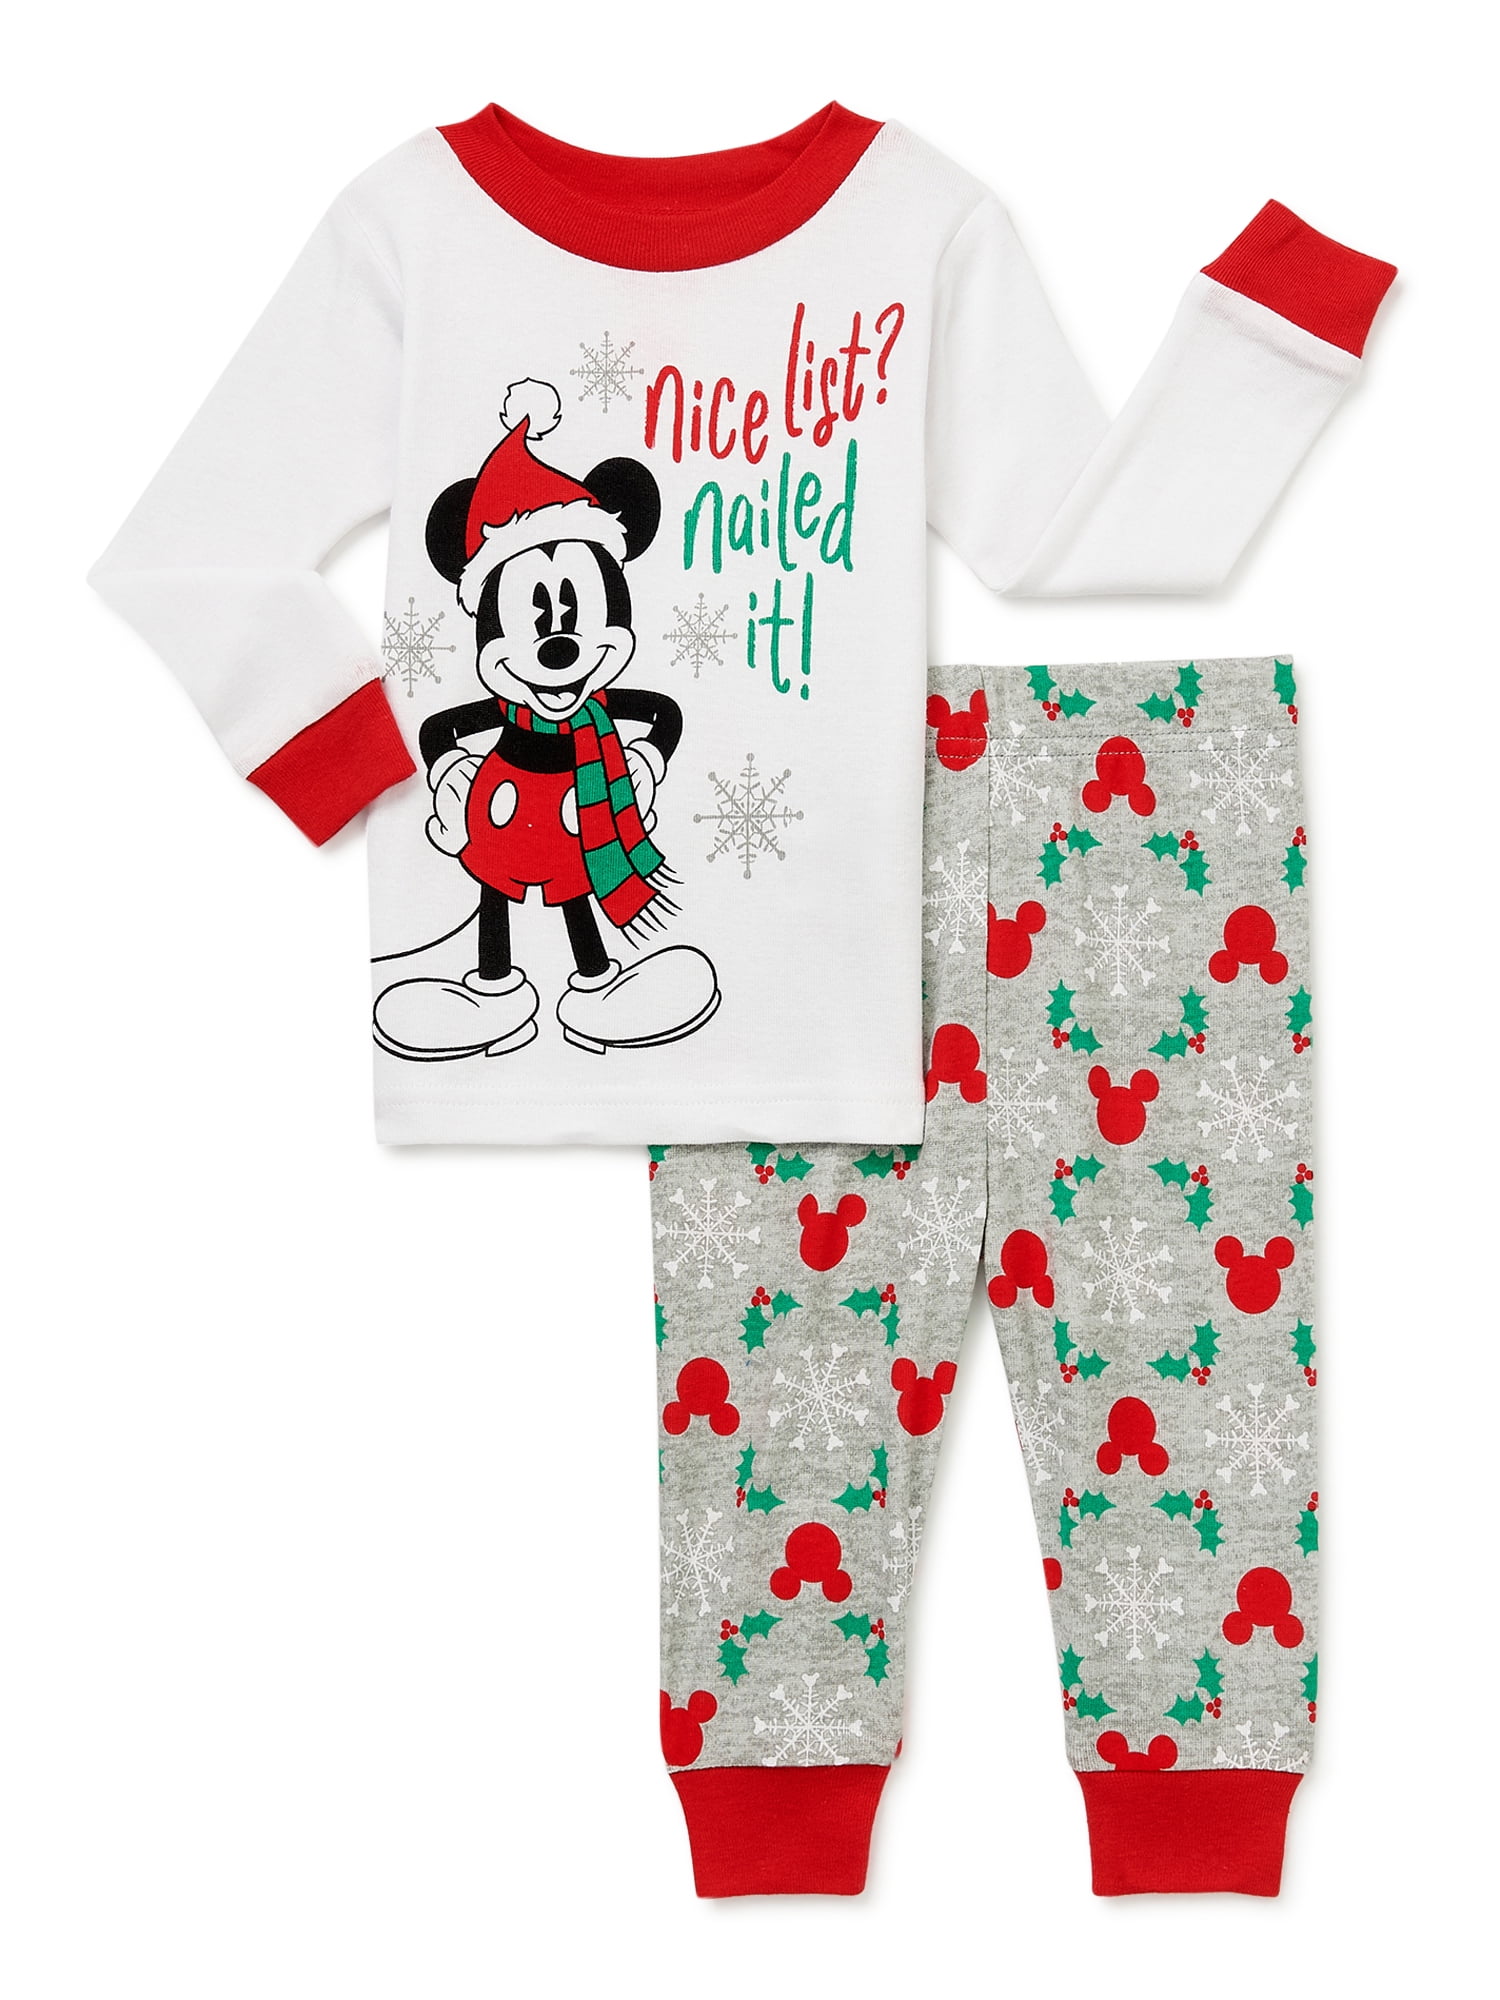 New with tags Disney Baby Mickey Mouse Halloween Pajamas 12 month Sleepwear 2 p 